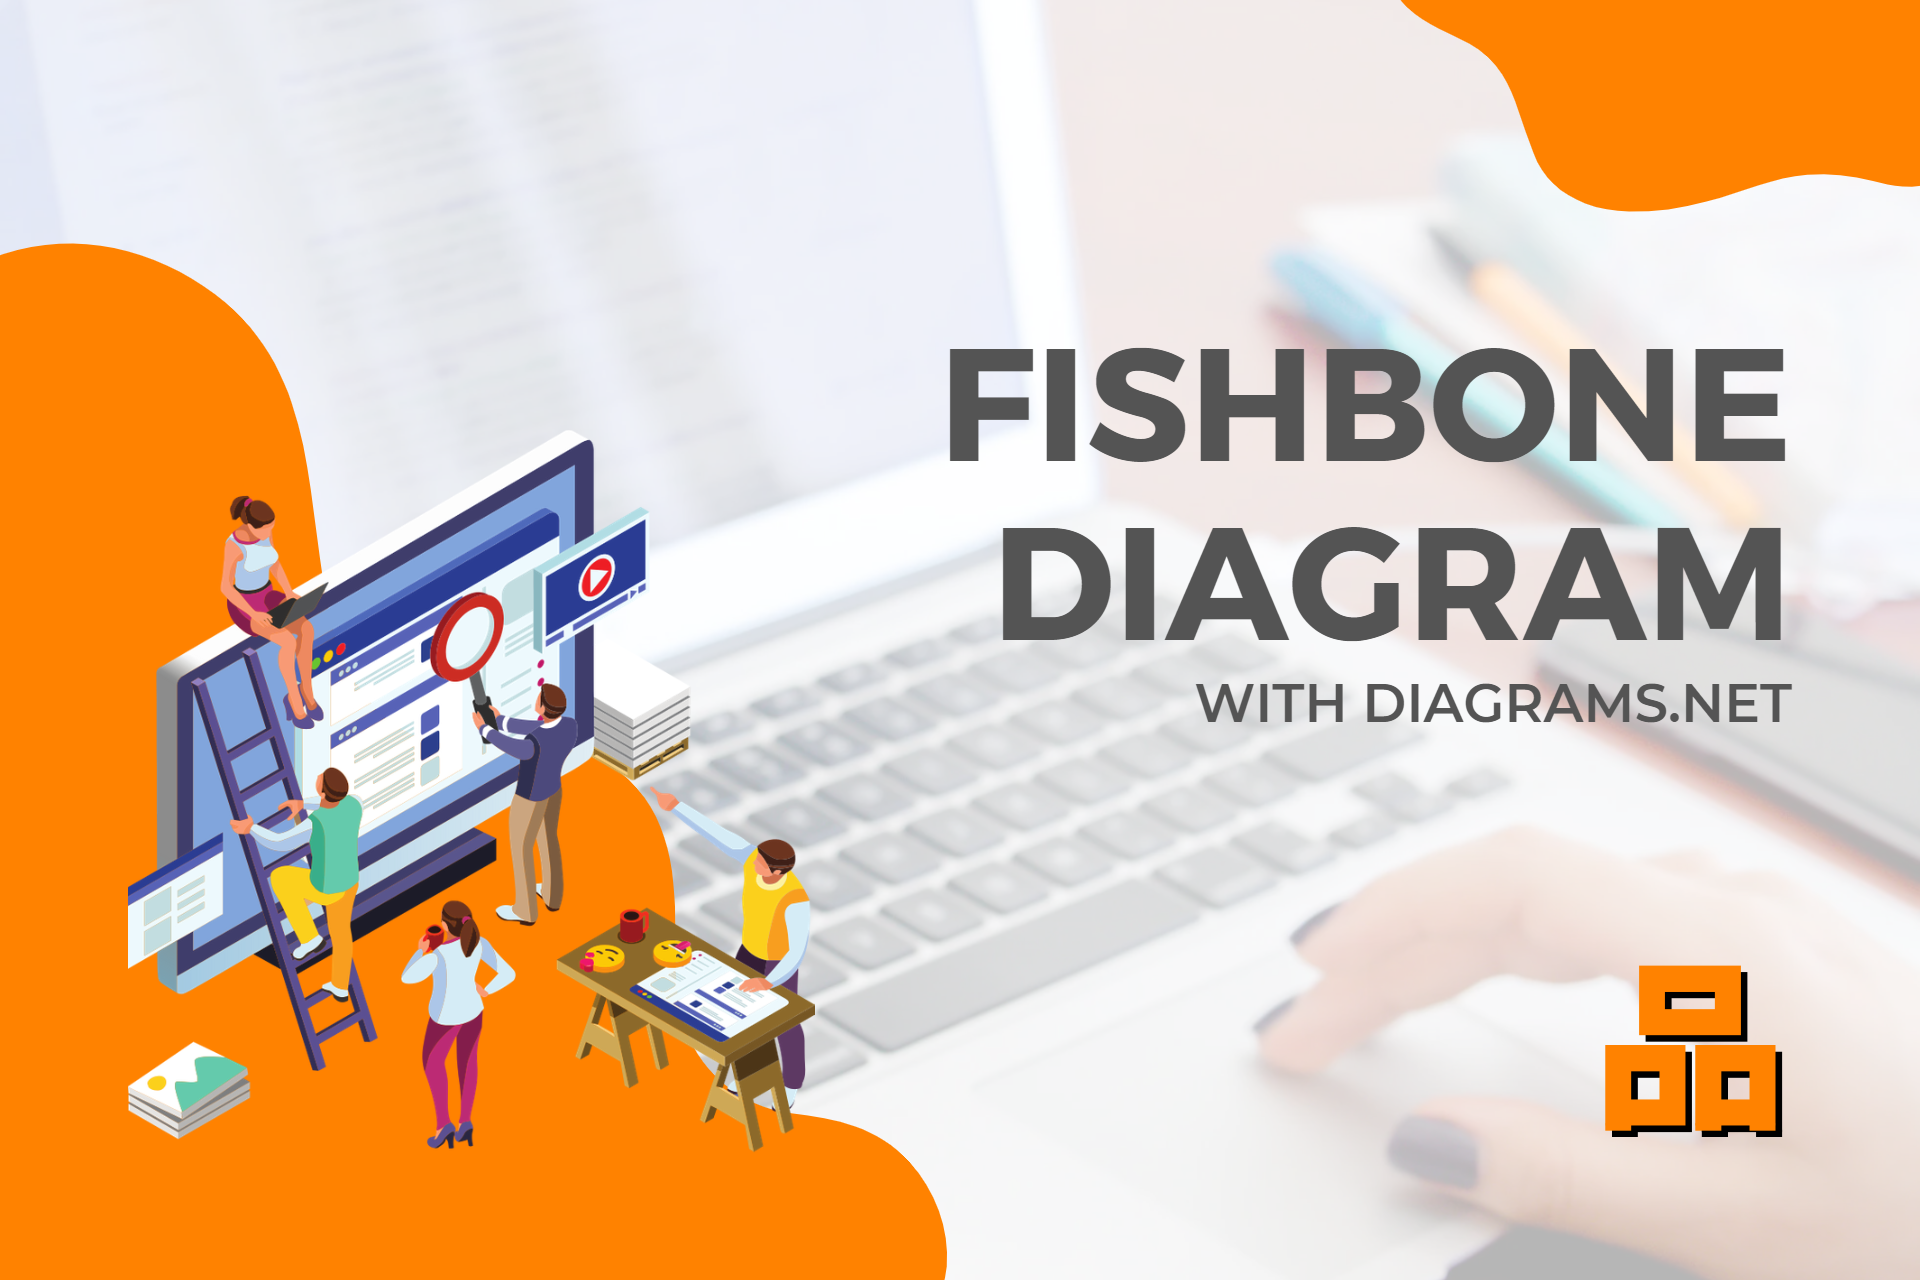 What is a Fishbone Diagram and how to make one using Diagrams.net